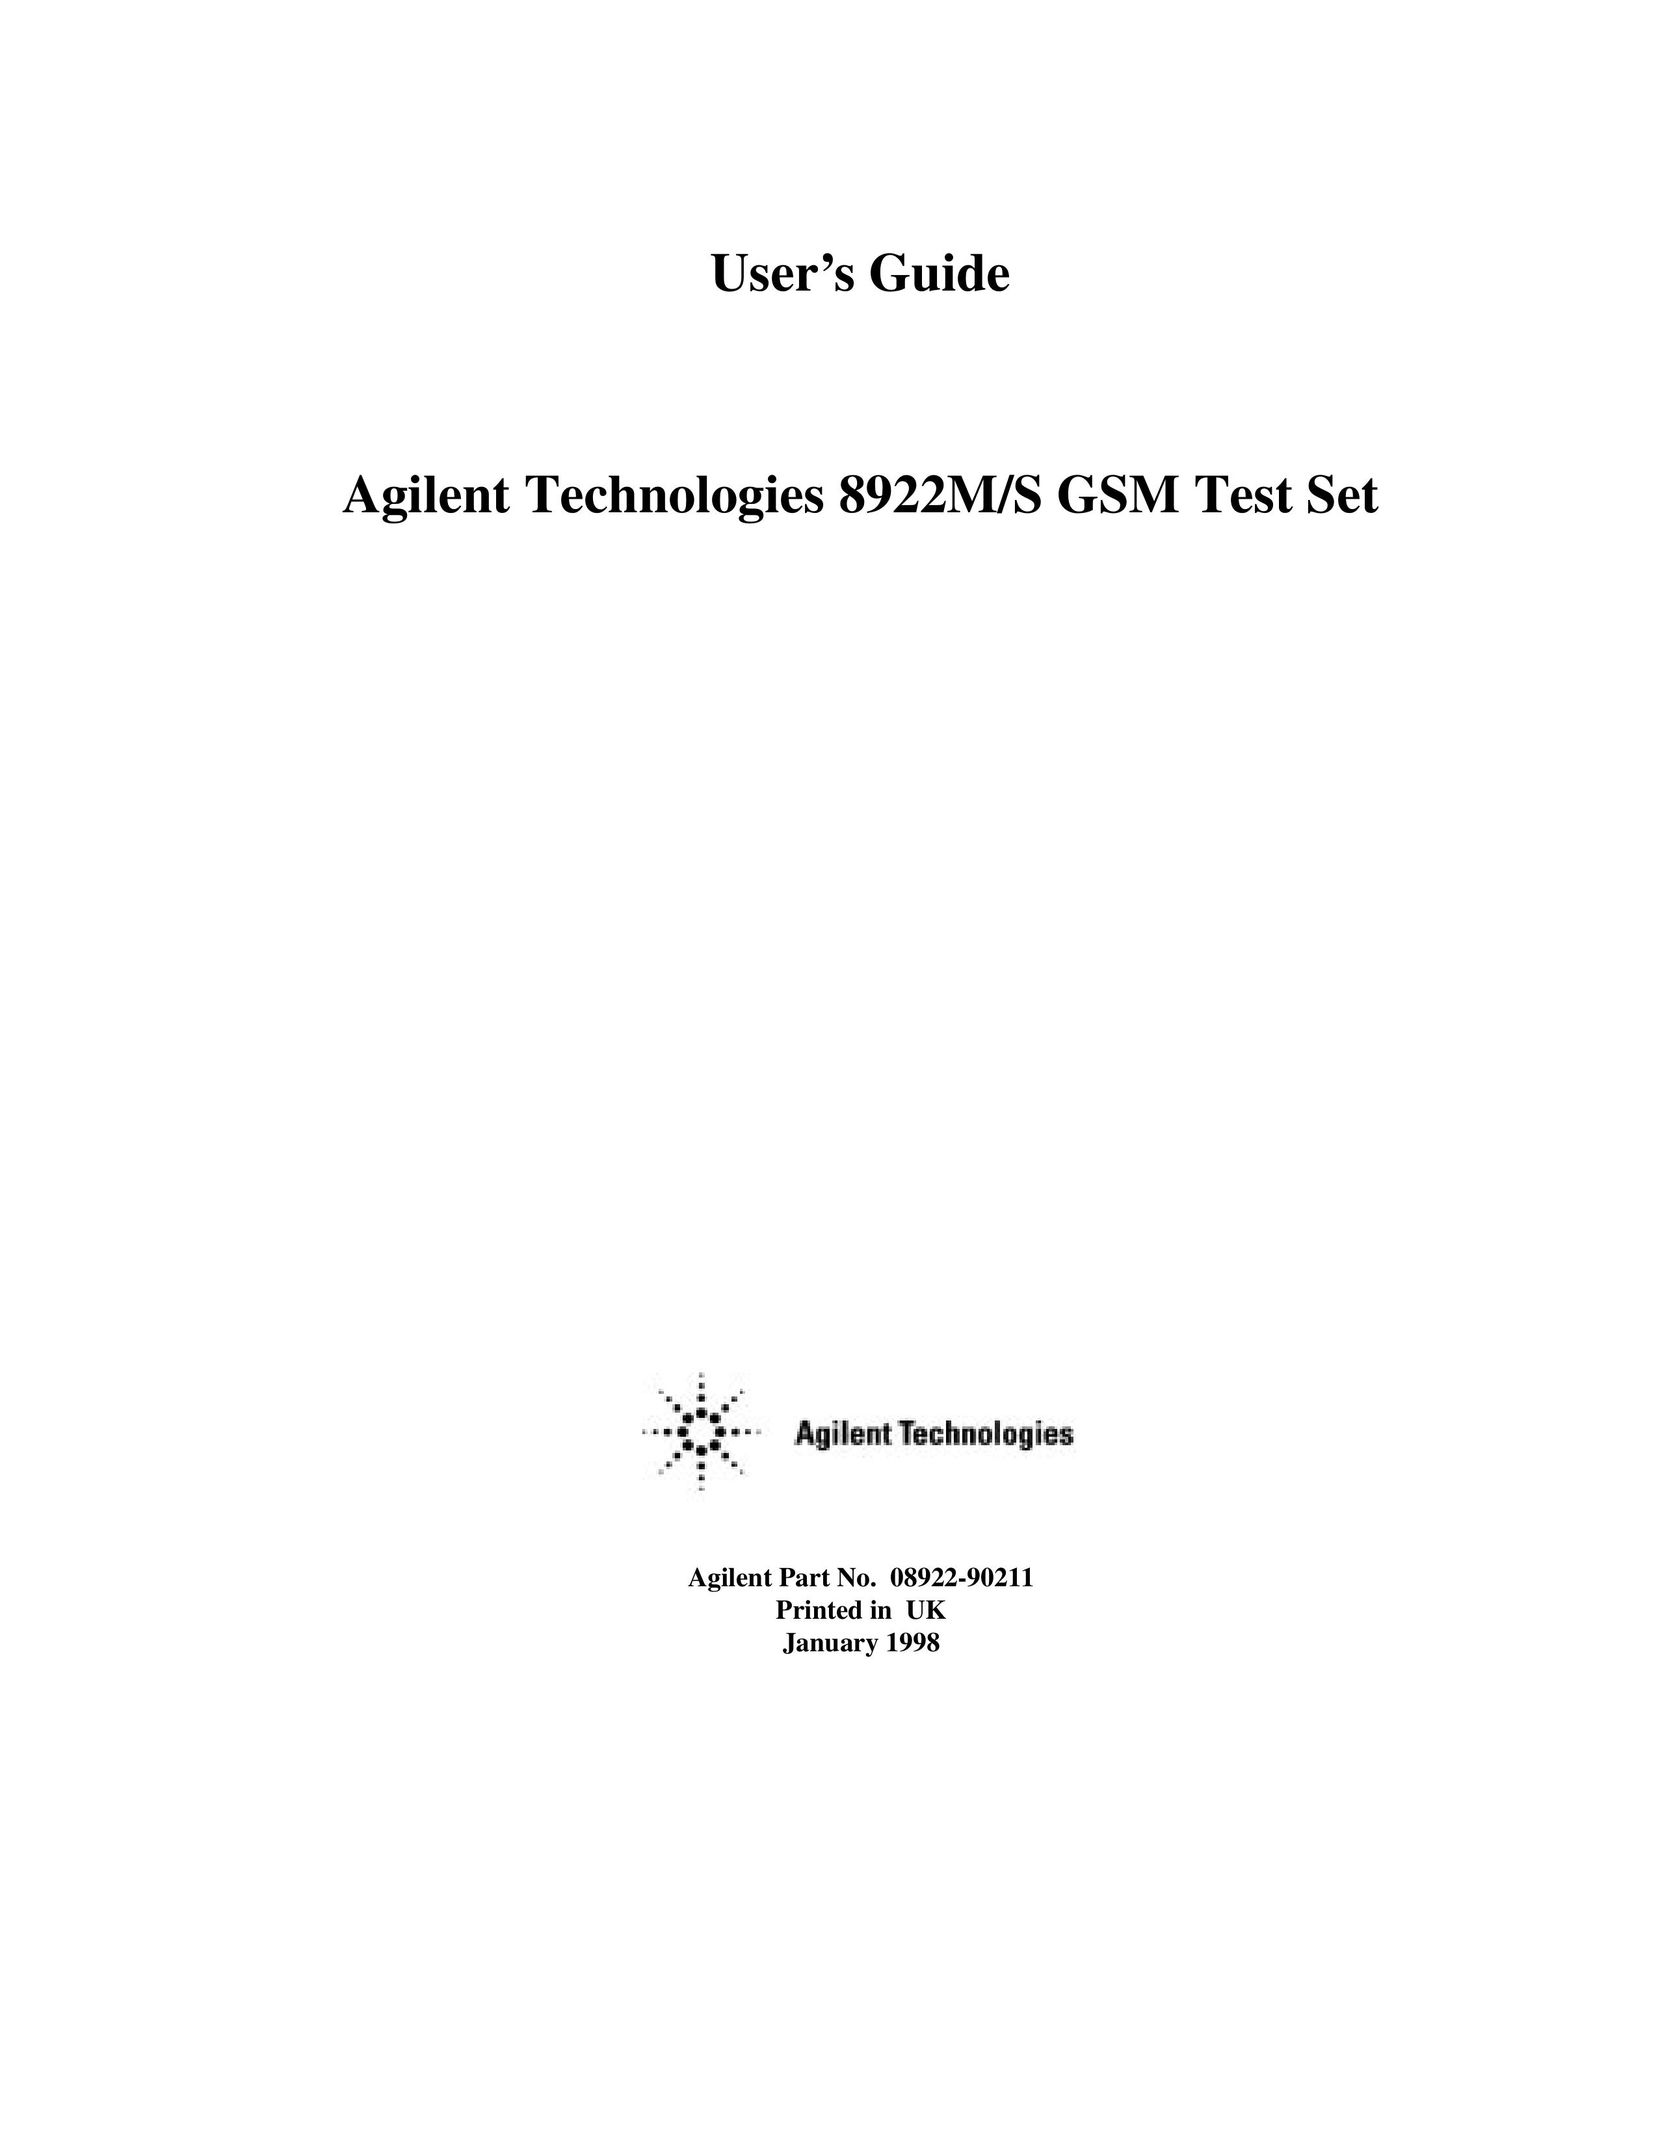 Agilent Technologies S GSM Cell Phone User Manual